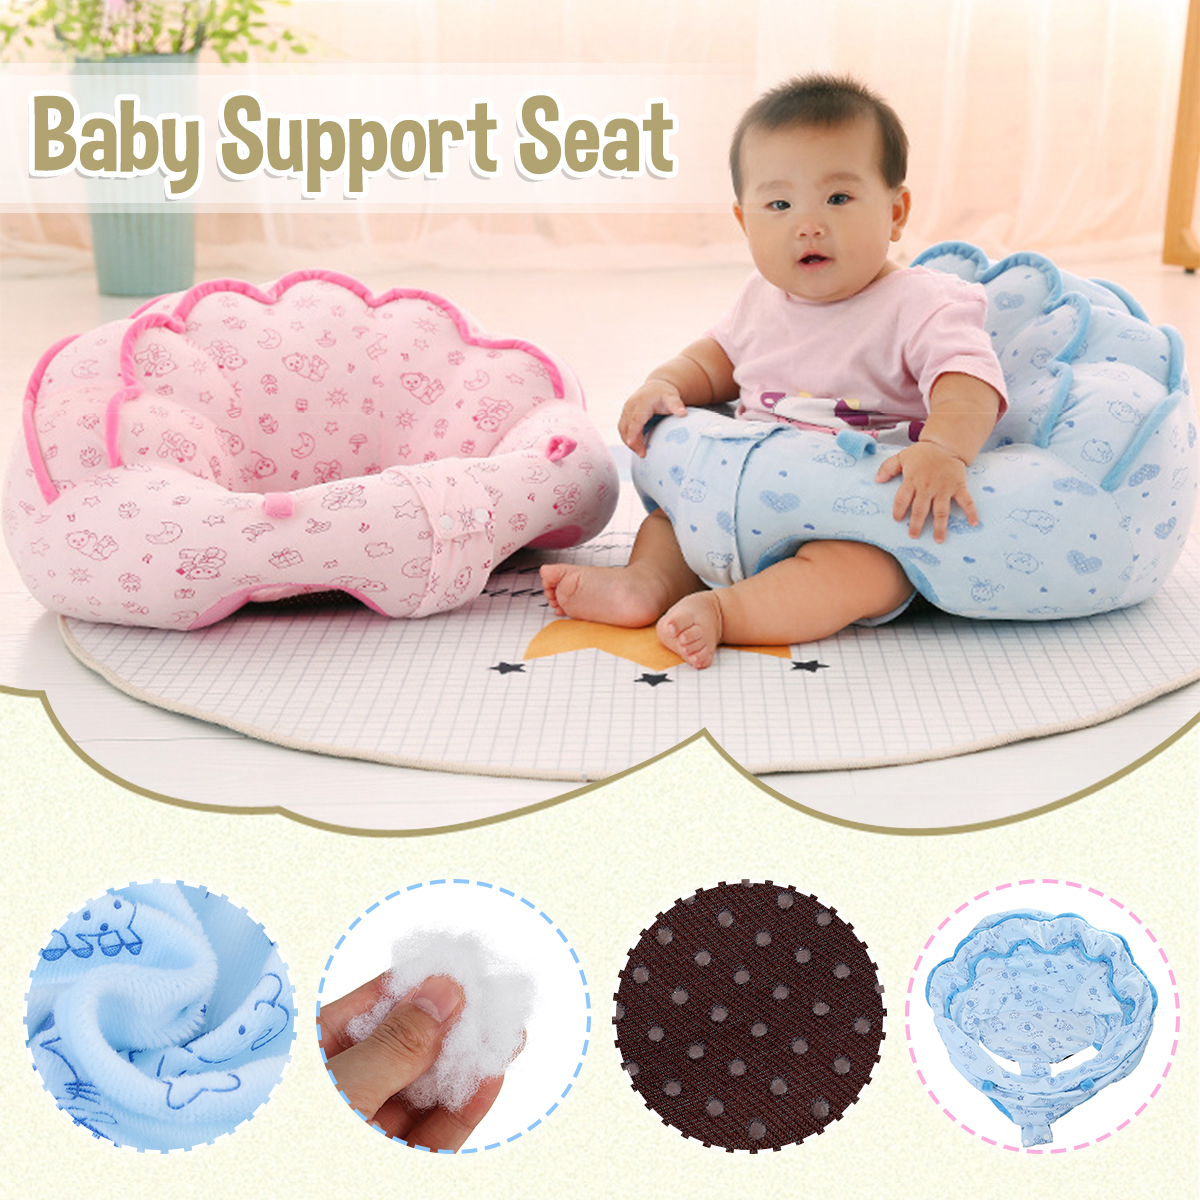 Blue-Pink-Color-Kids-Baby-360deg-Comfortable-Support-Seat-Plush-Sofa-Learning-To-Sit-Chair-Cushion-T-1887110-1